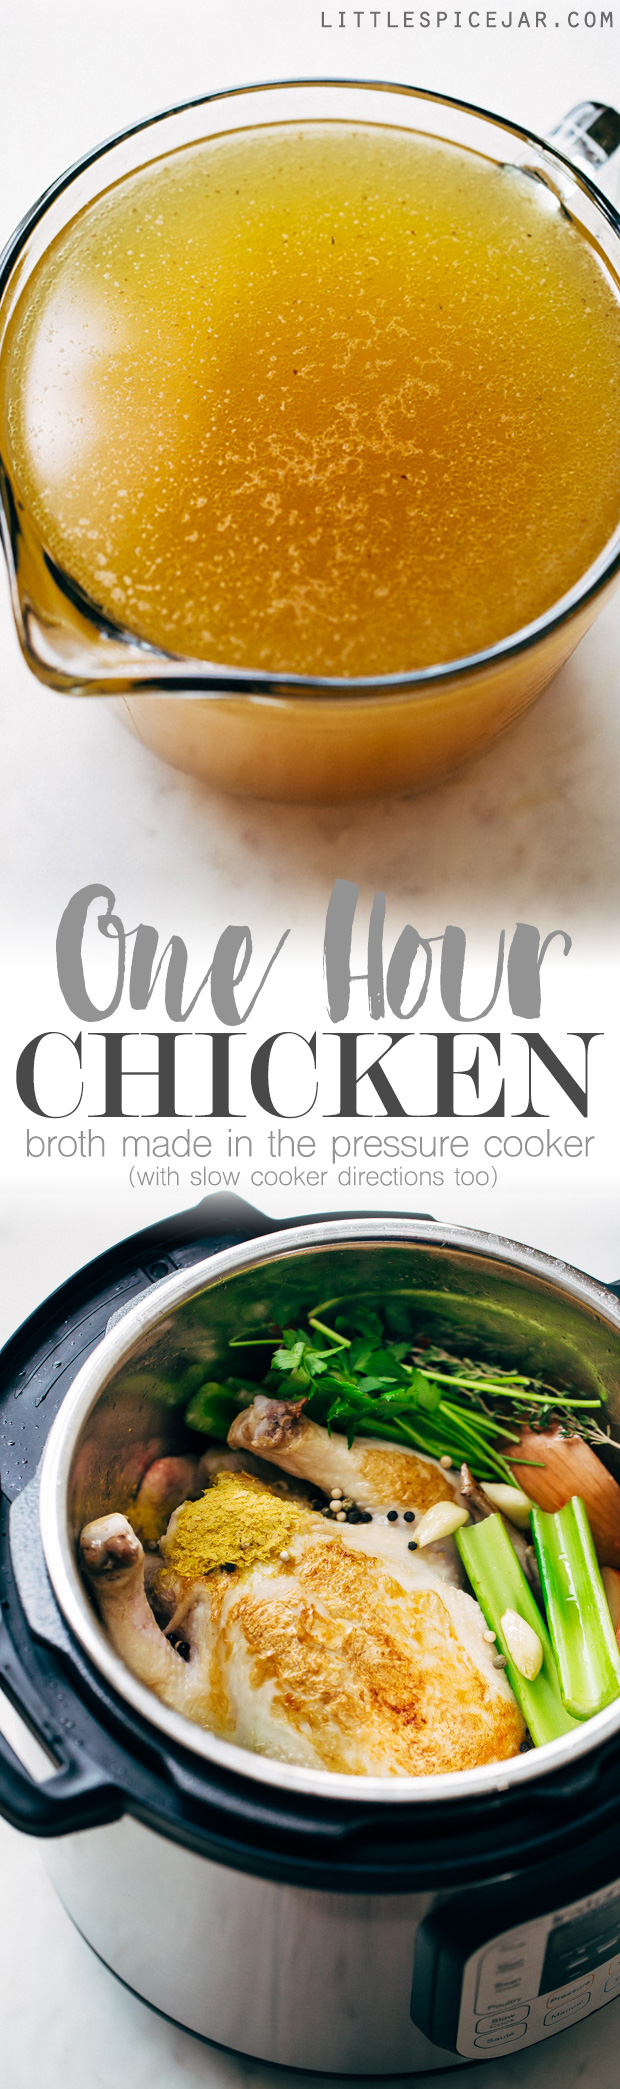 One-hour pressure cooker chicken broth - Learn how to make  chicken broth in a pressure cooker in 1 hour! This is a simple recipe that you can easily prepare and use in all your favorite dishes! #chickenbroth #bonebroth #pressurecooker #instantpot #instantpotchickenbroth | Littlespicejar.com